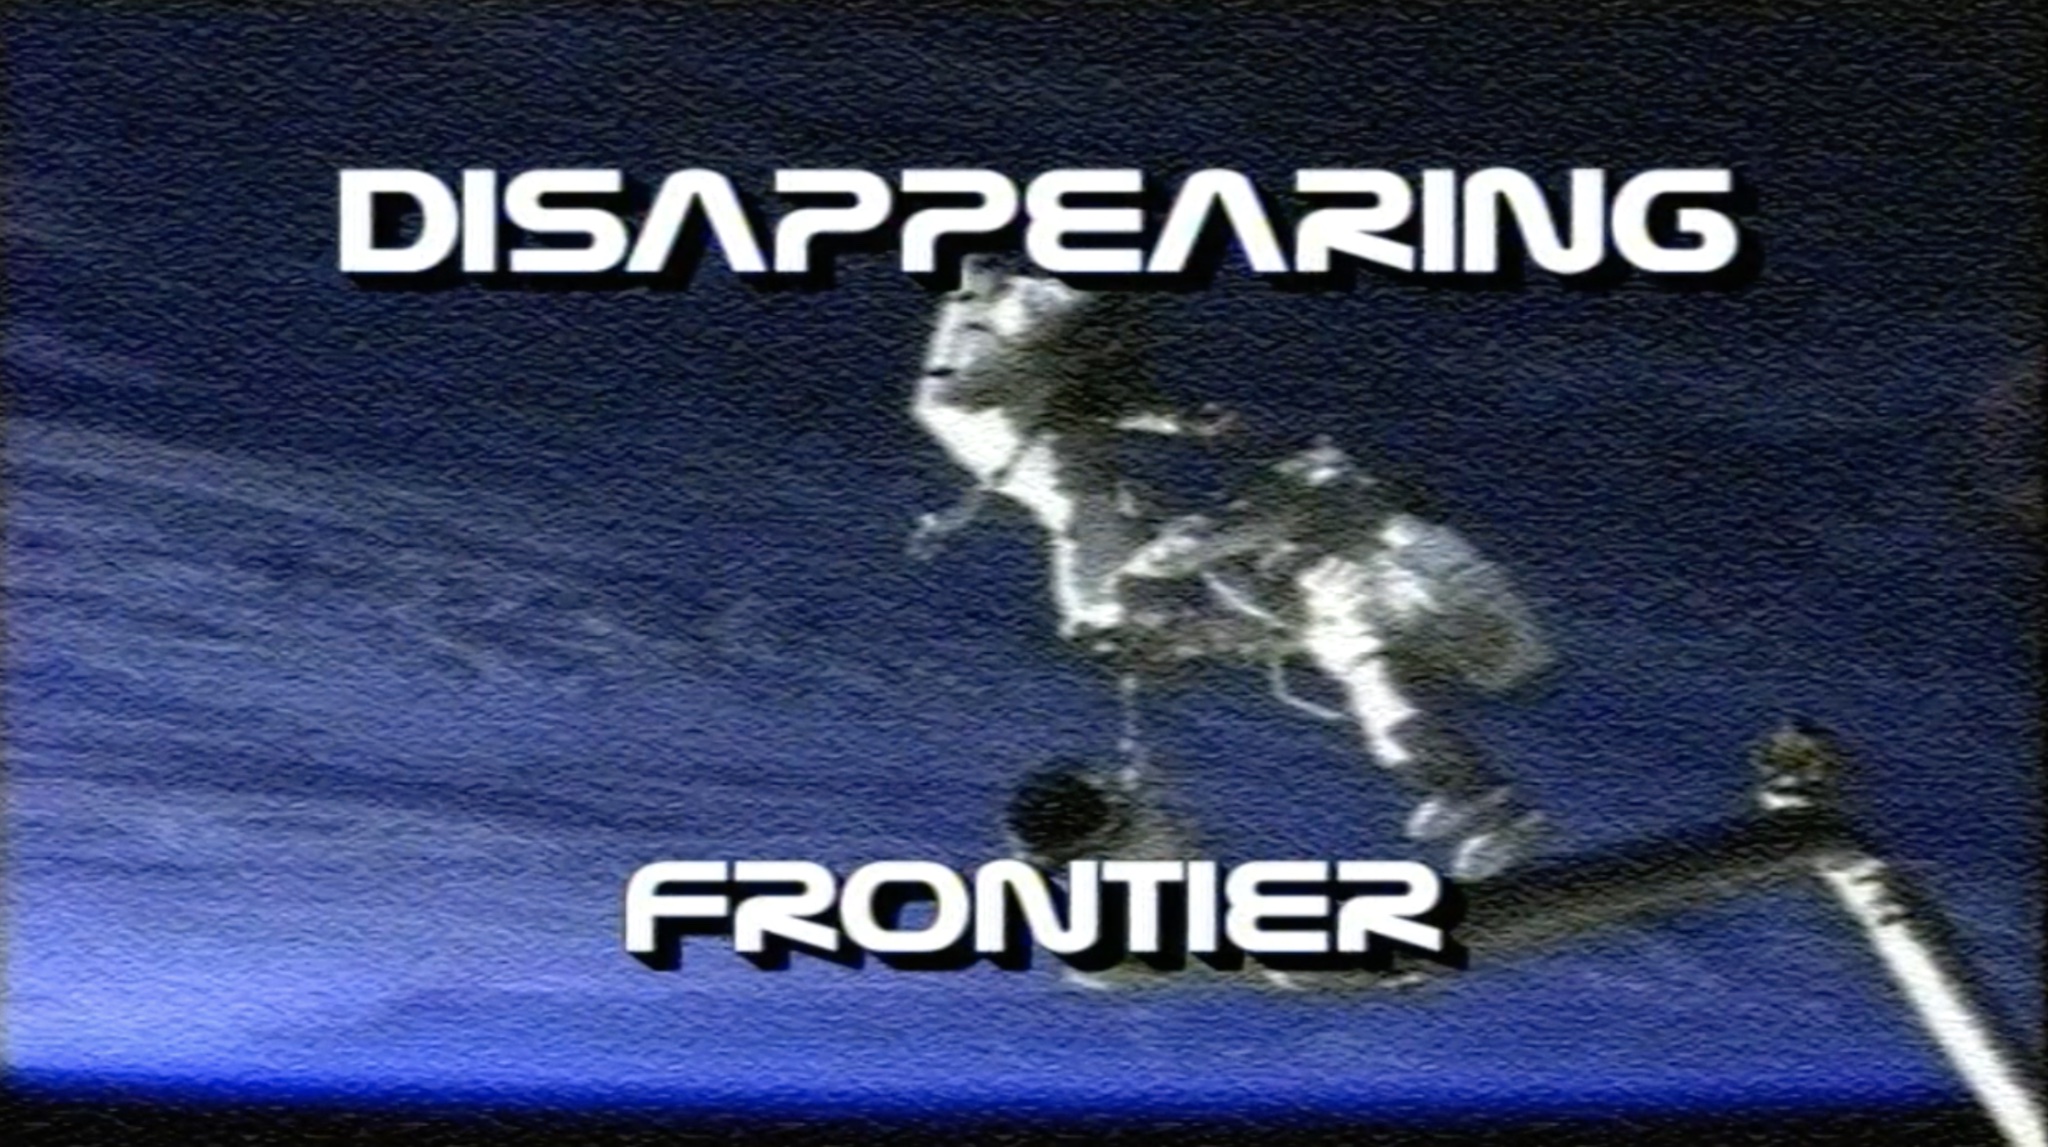 Disappearing Frontier